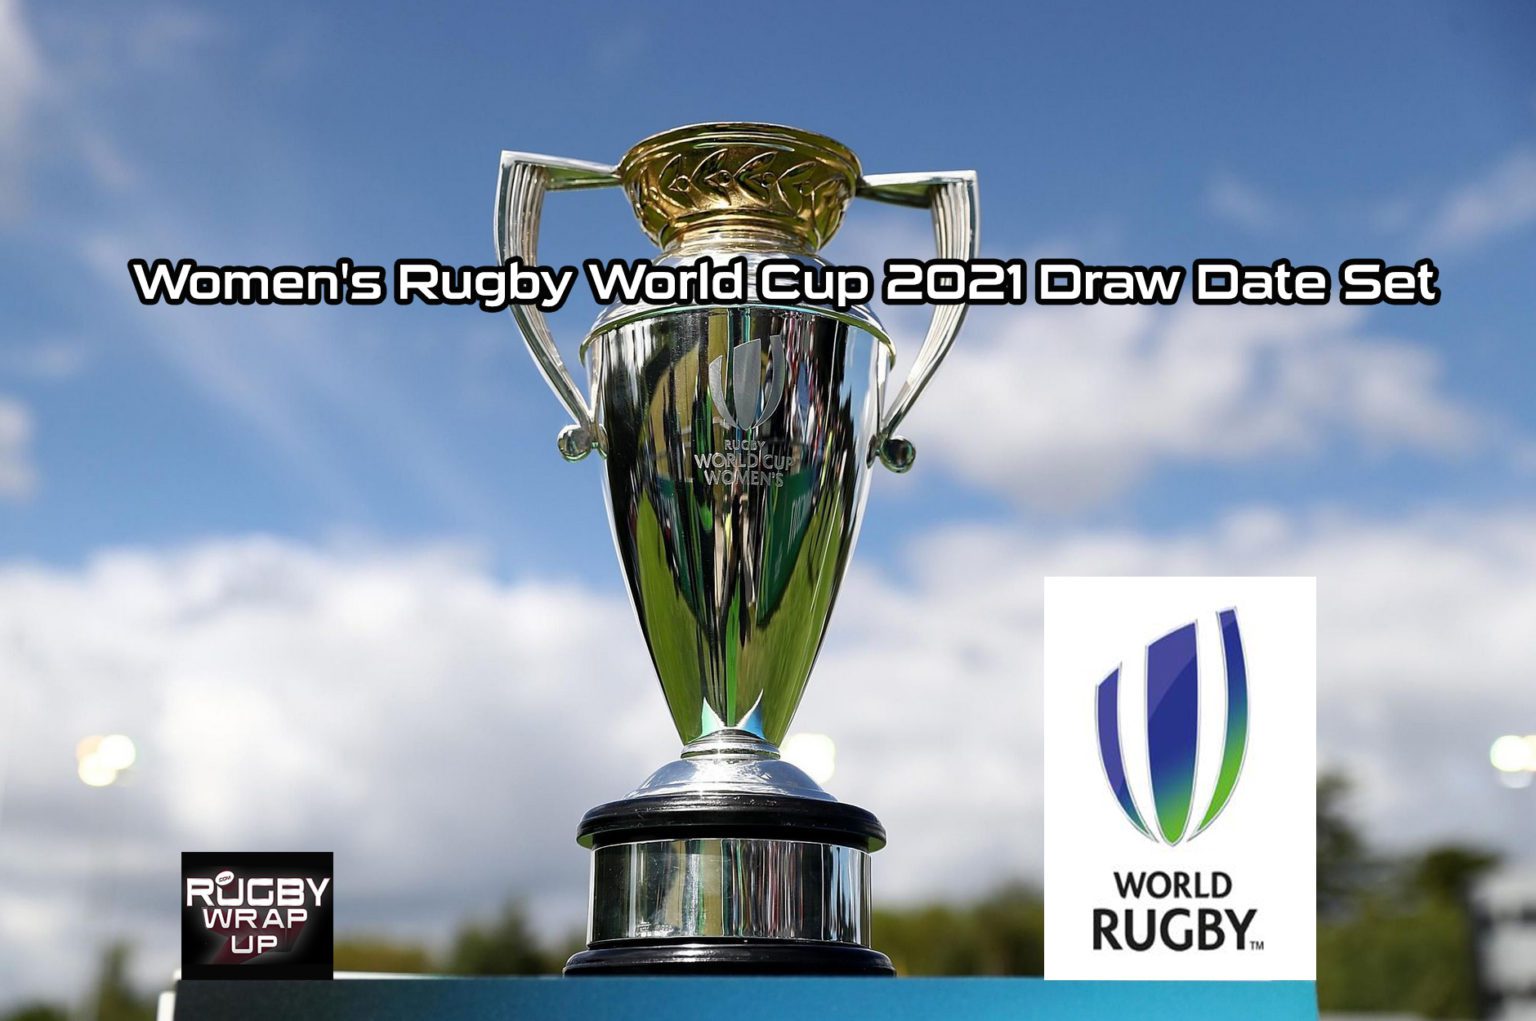 Women's Rugby World Cup 2021 Draw Date Set